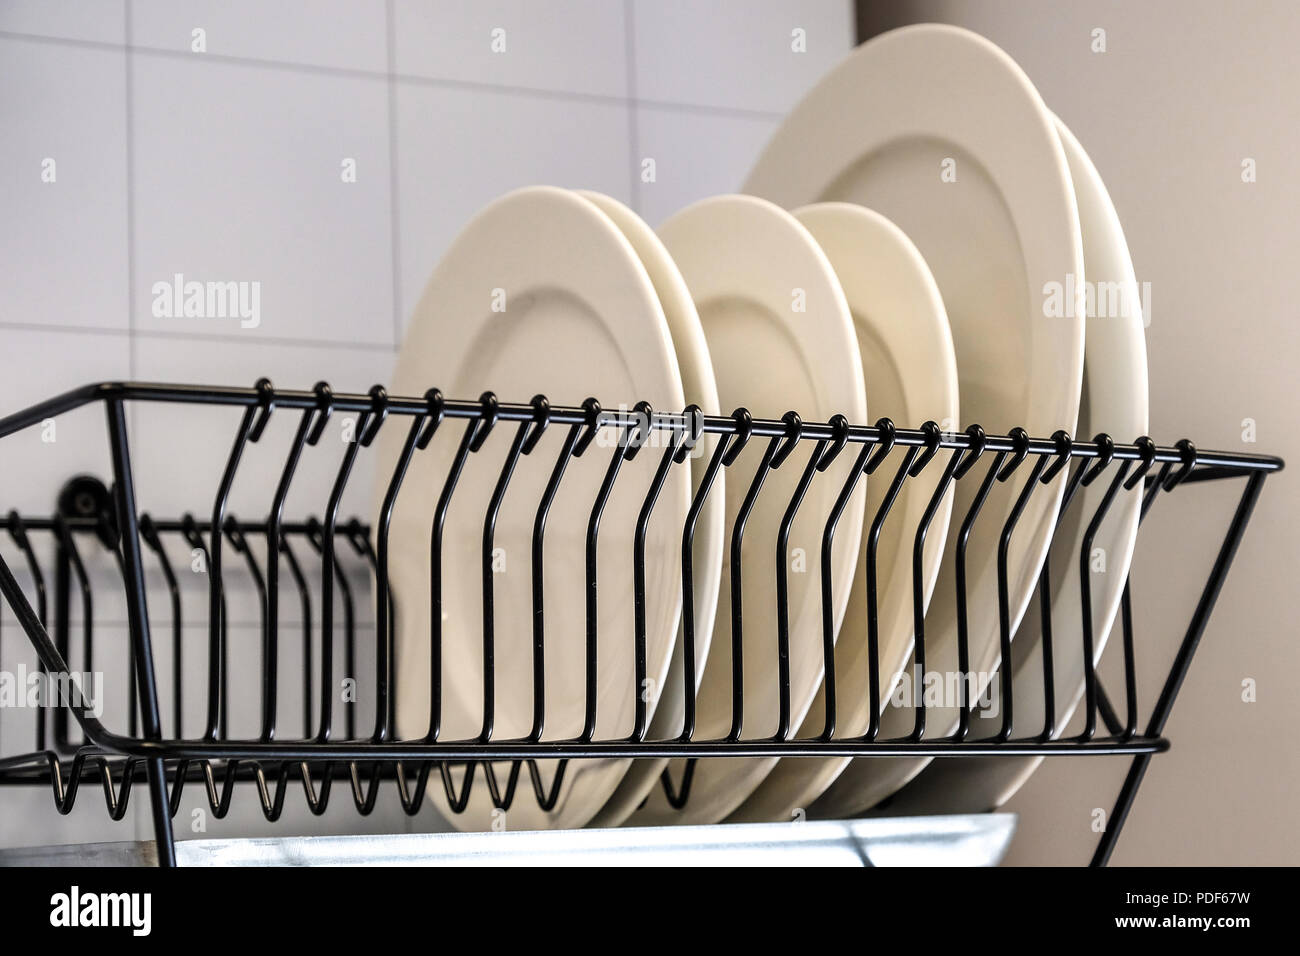 https://c8.alamy.com/comp/PDF67W/white-dishes-drying-on-metal-dish-rack-dish-drying-rack-the-dryer-is-fixed-horizontally-on-the-wall-PDF67W.jpg